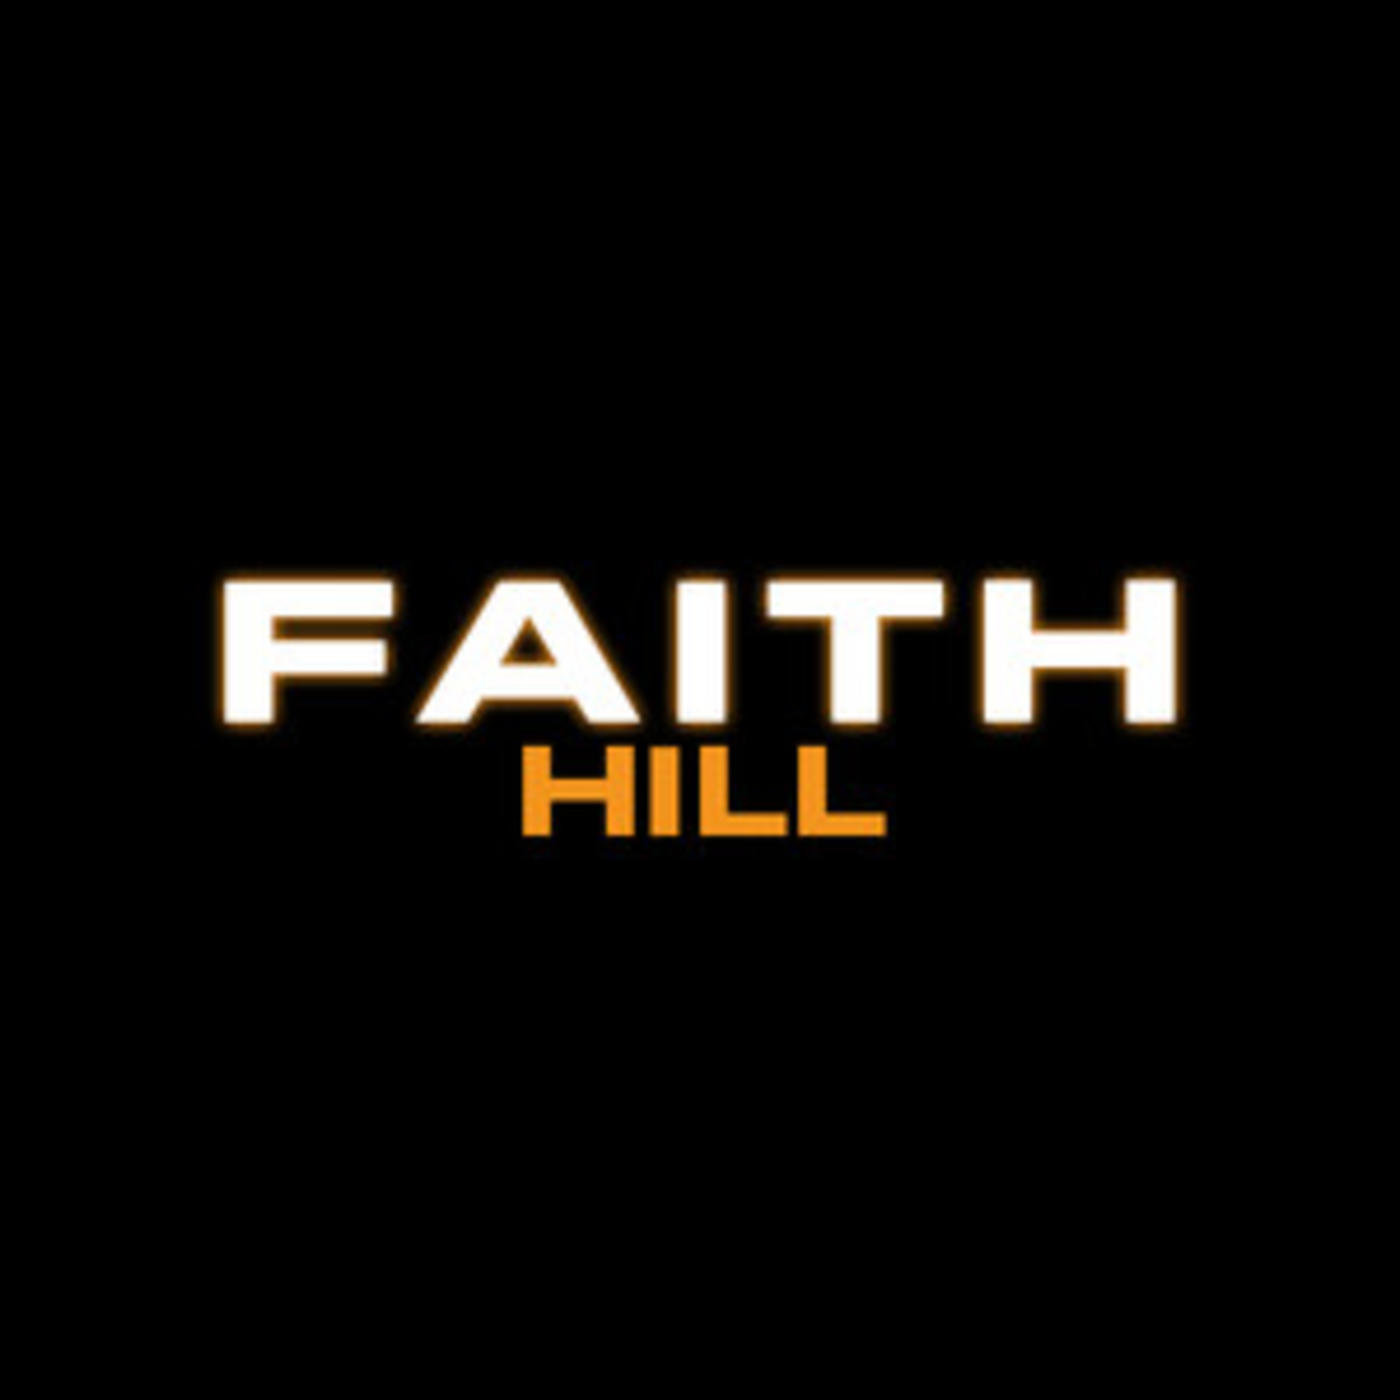 Official Faith Hill playlist - Breathe, This Kiss, The Way You Love me, There You'll Be, Cry